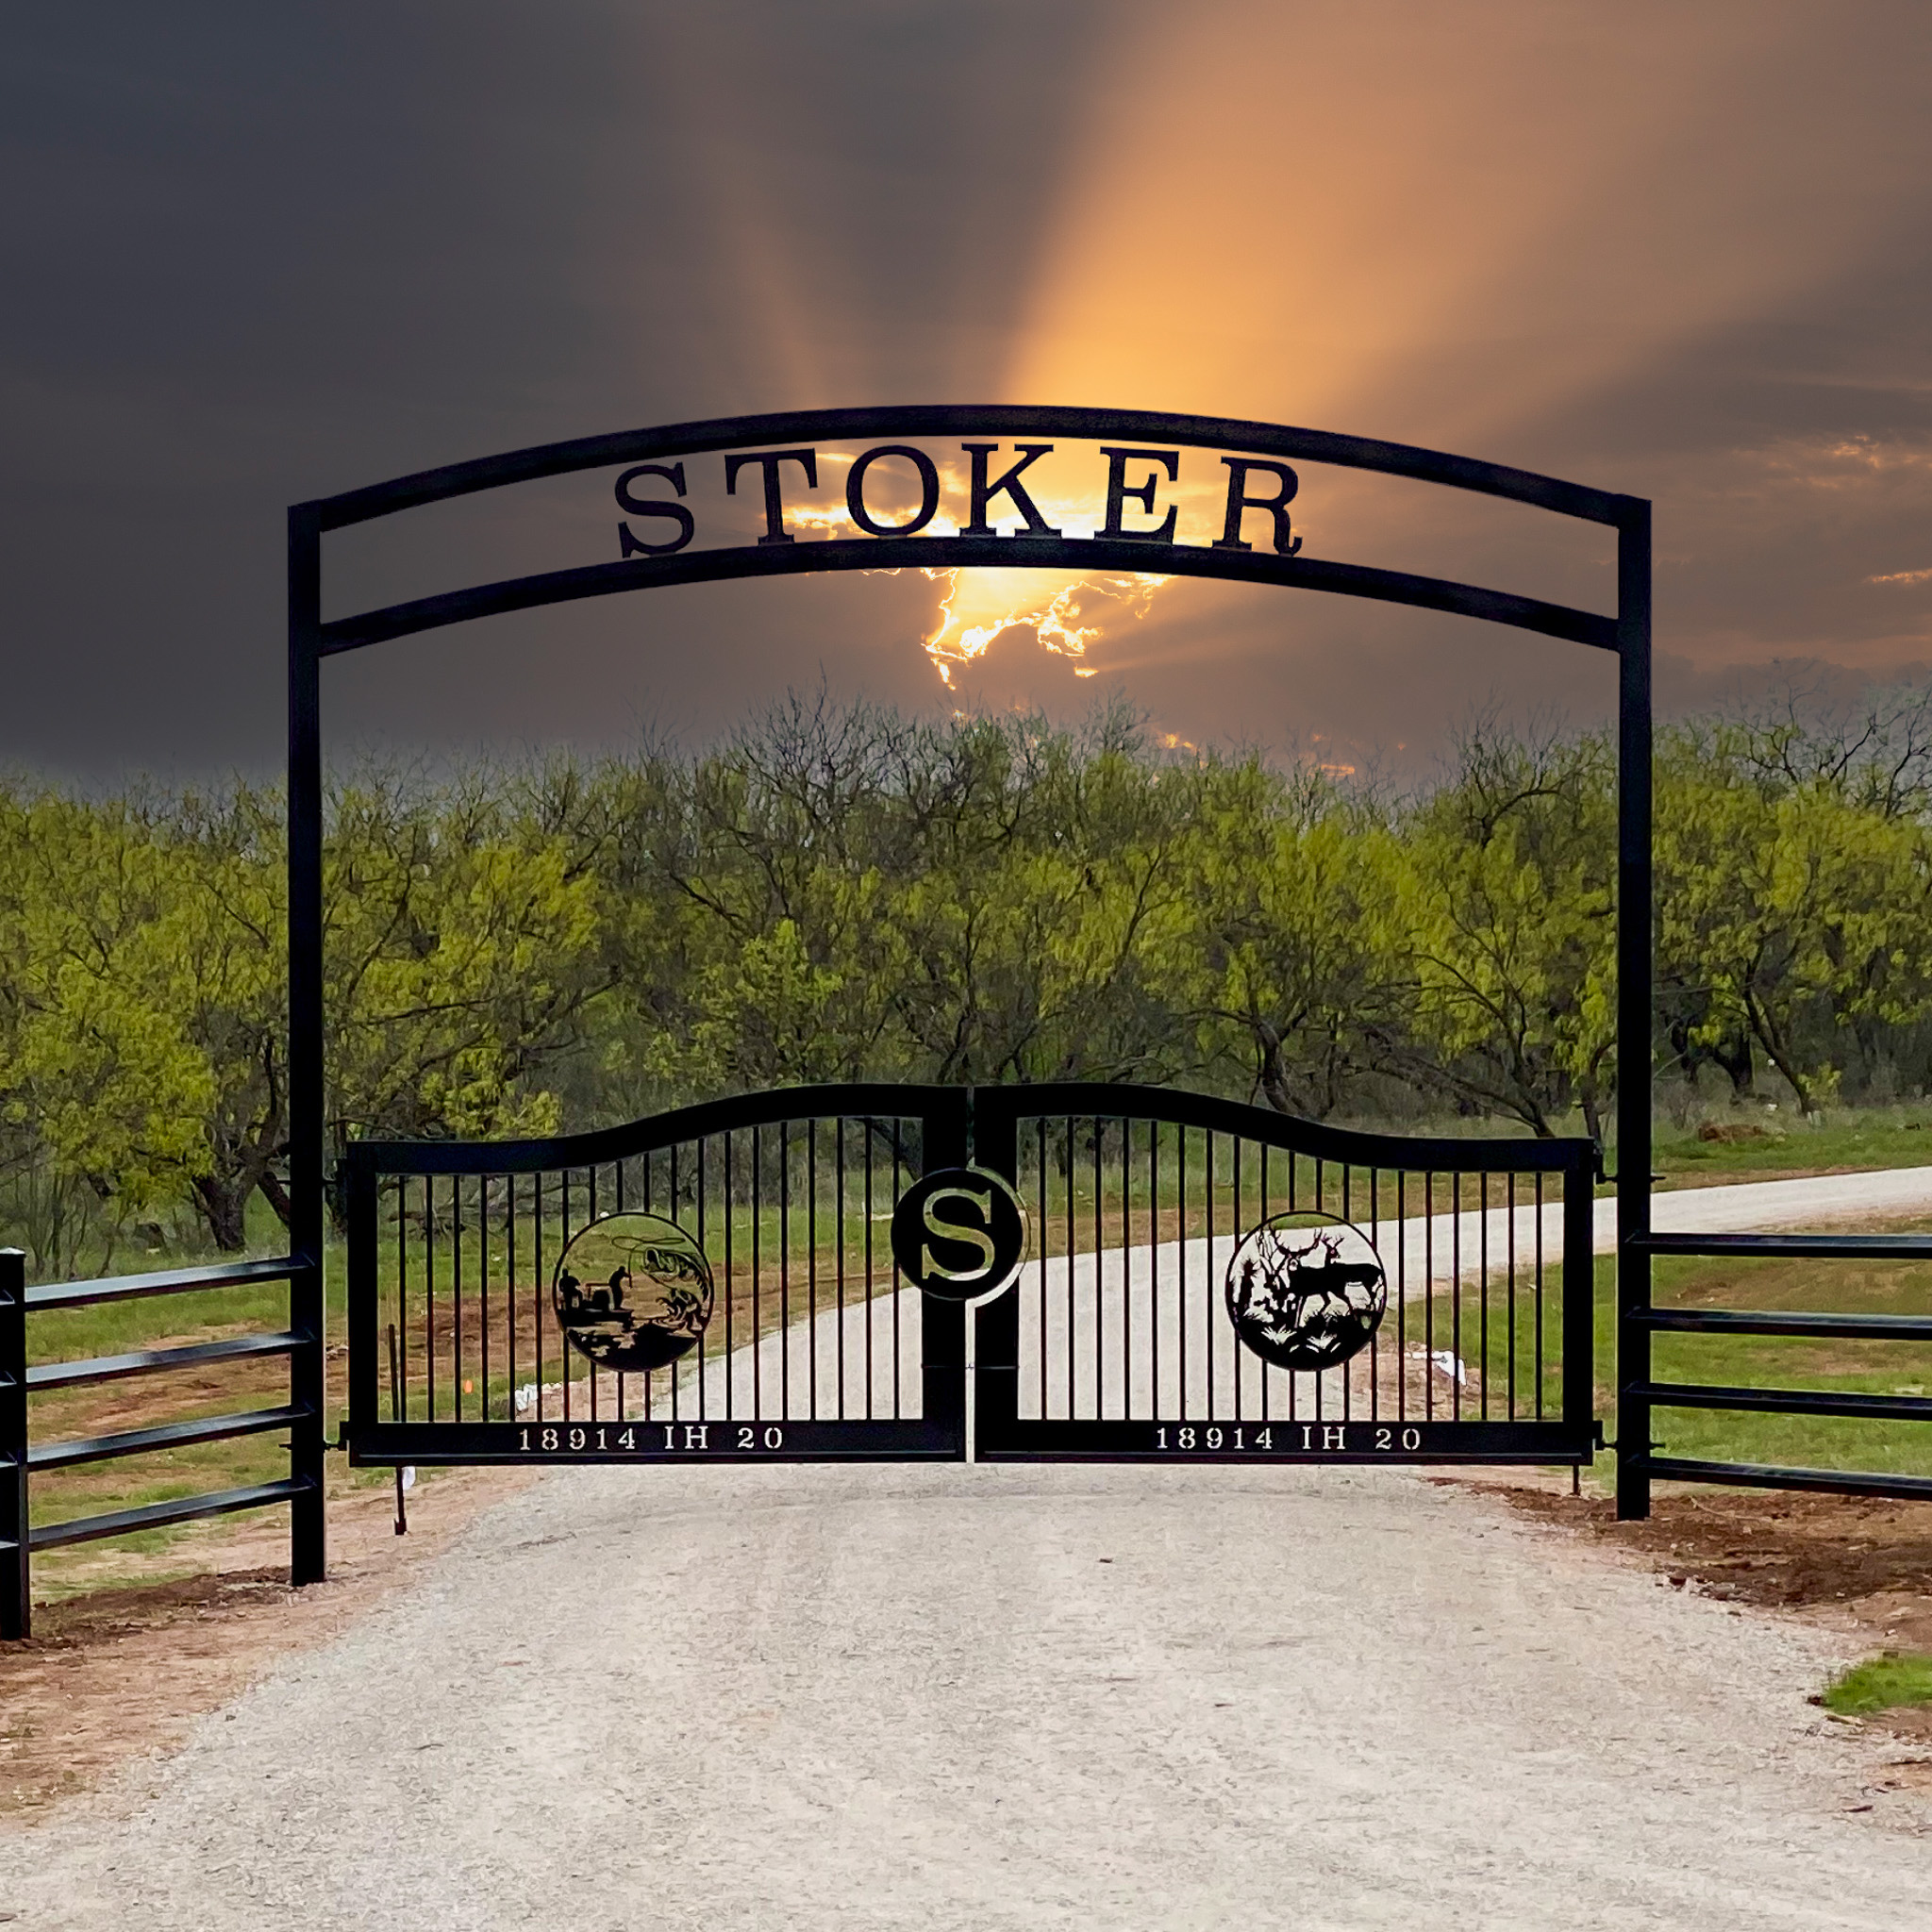 Stoker written above a ranch gate with bass on left side and a deer on the right side of the gate